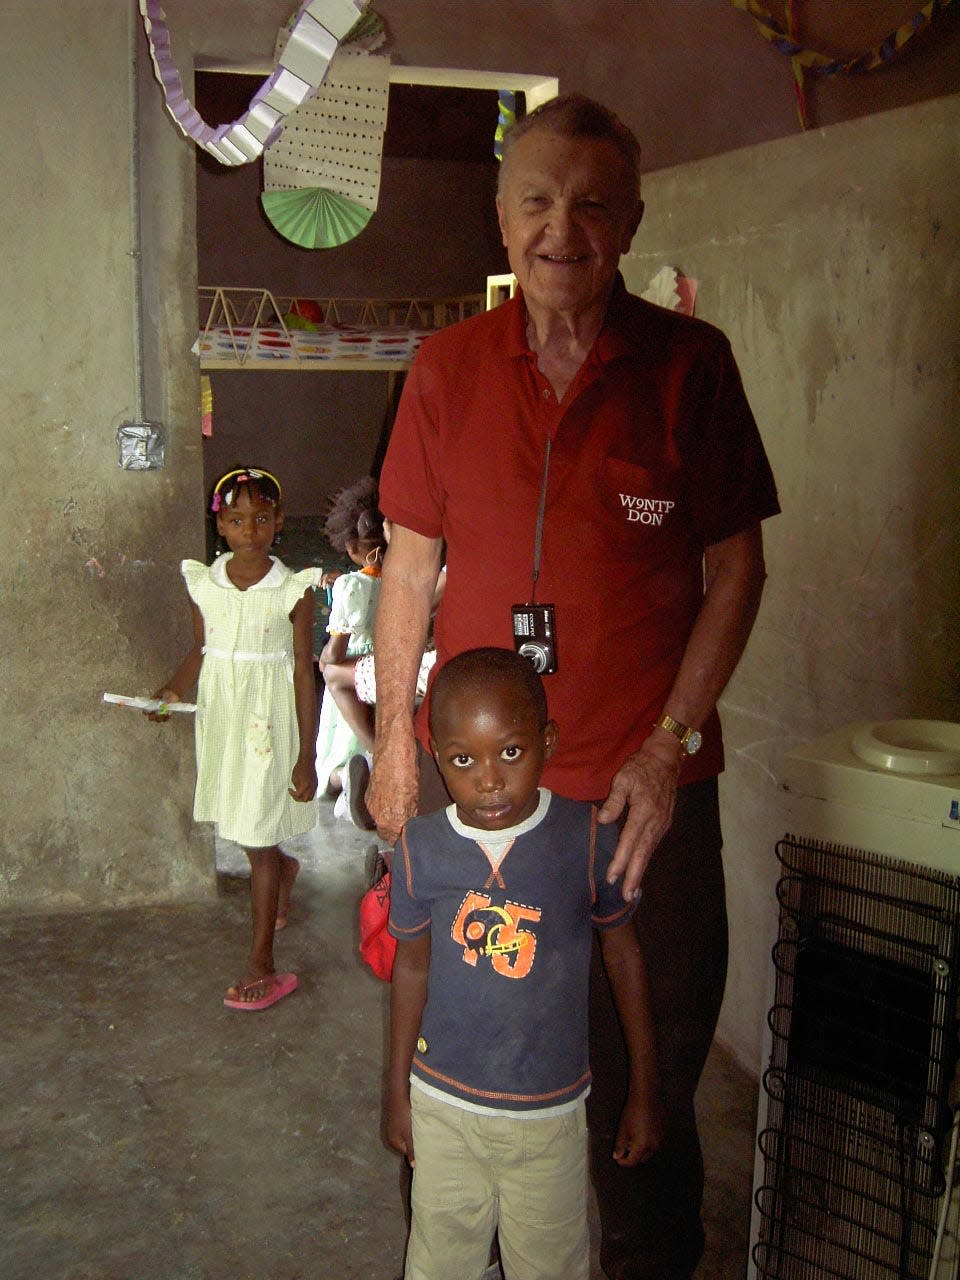 Don Miller was at an orphanage in Fedja, Haiti, in this undated photo. His church, Moscow Christian Church in Moscow, Indiana, helped to sponsor a missionary effort in Haiti that supported the construction of churches that are also used as schools and helped sponsor the orphanage.